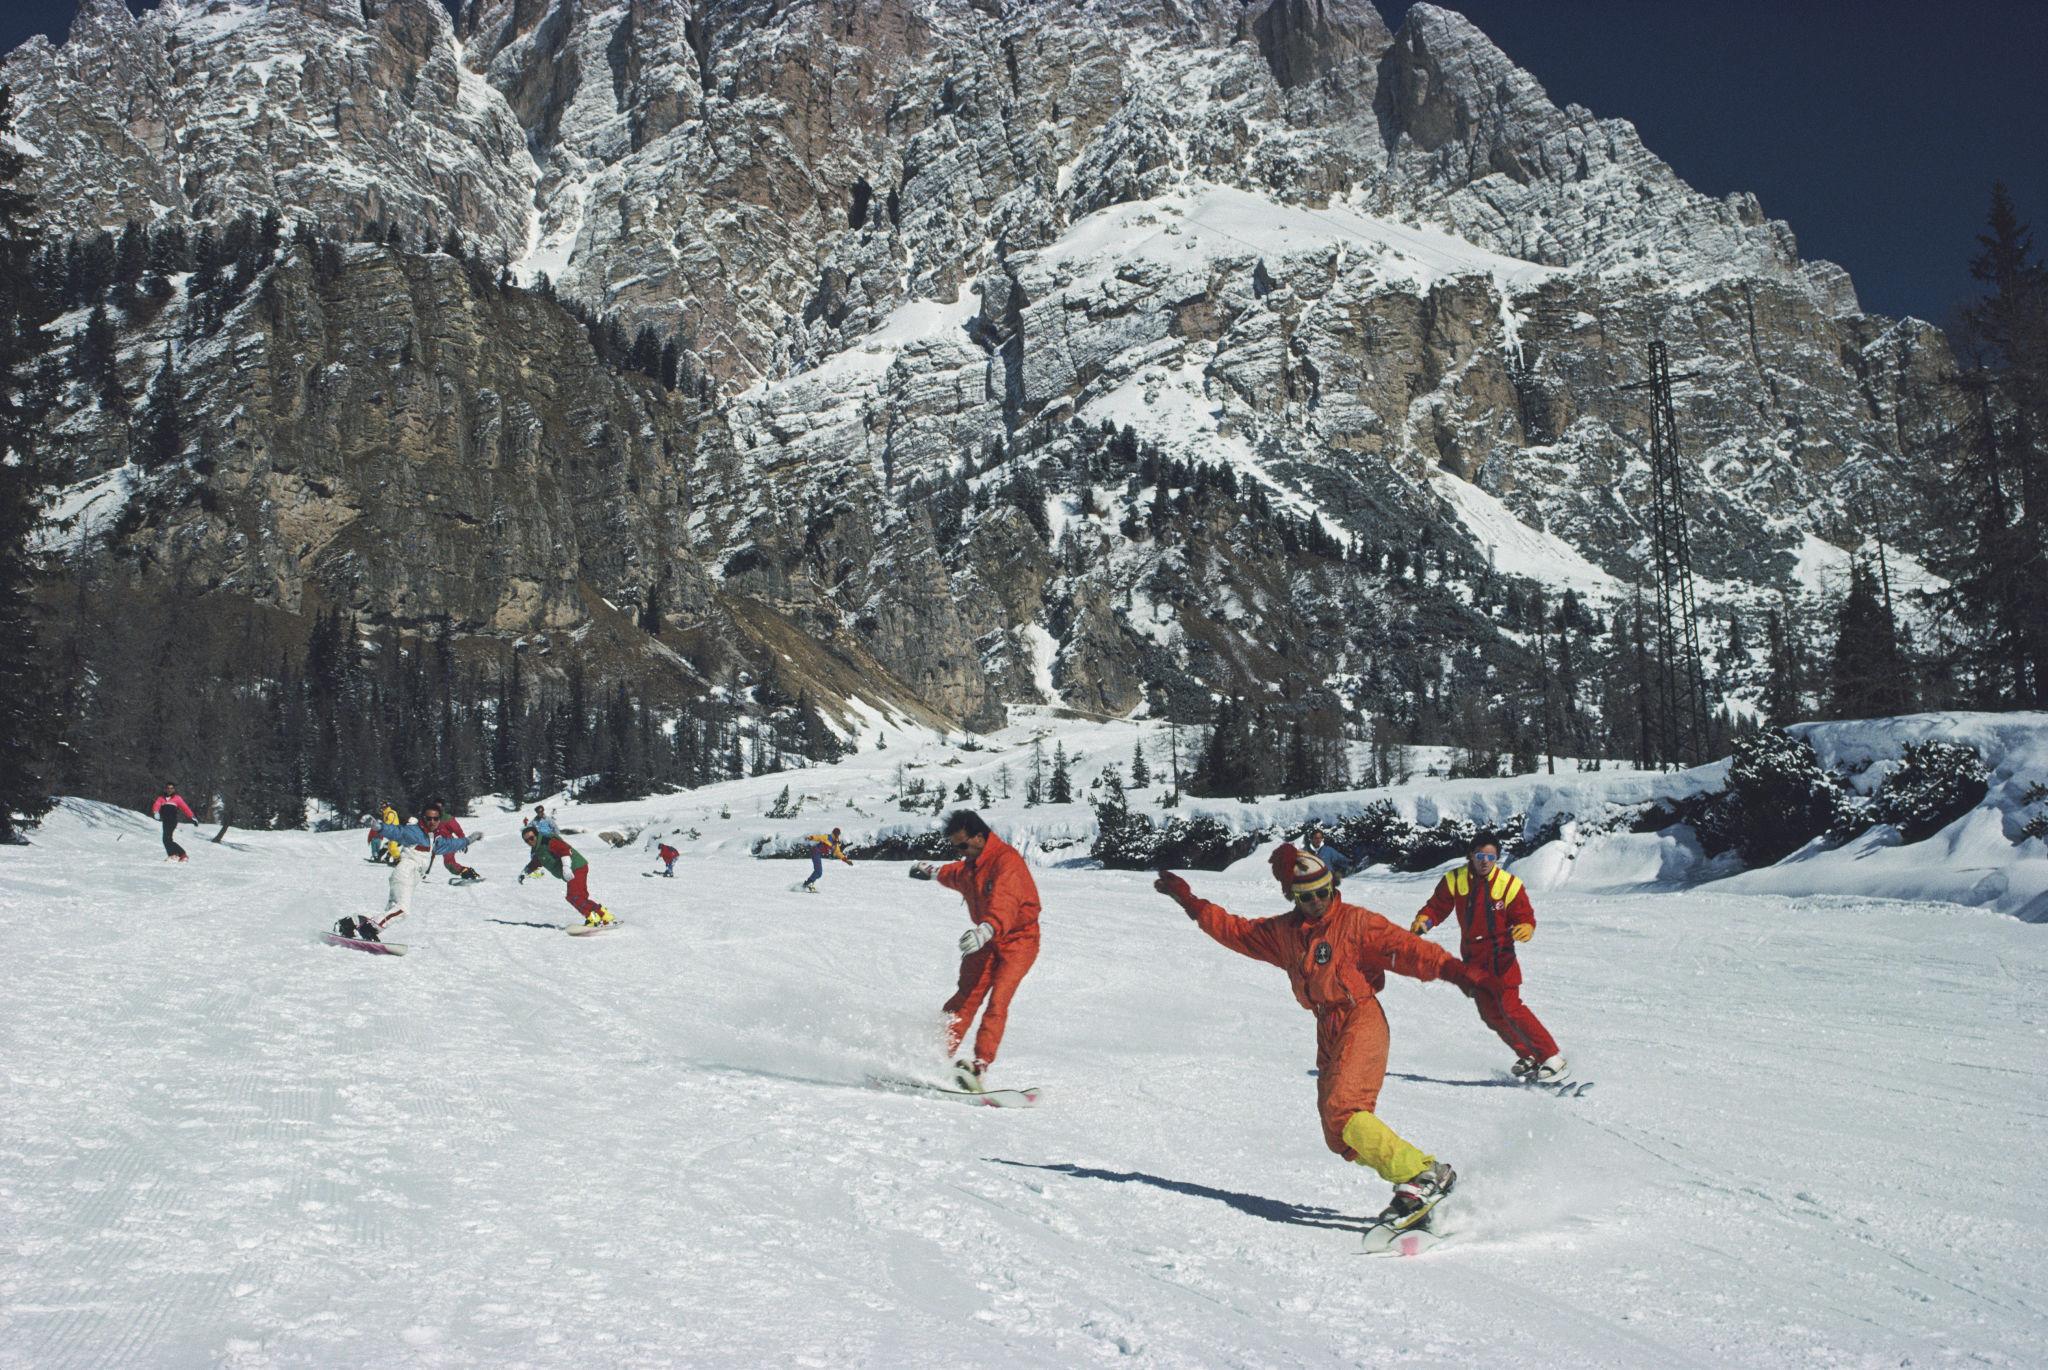 'Cortina d'Ampezzo' 1988 Slim Aarons Limited Estate Edition Print 

Snowboarding in Cortina d'Ampezzo, March 1988. (Photo by Slim Aarons/Hulton Archive/Getty Images)

Produced from the original transparency
Certificate of authenticity supplied